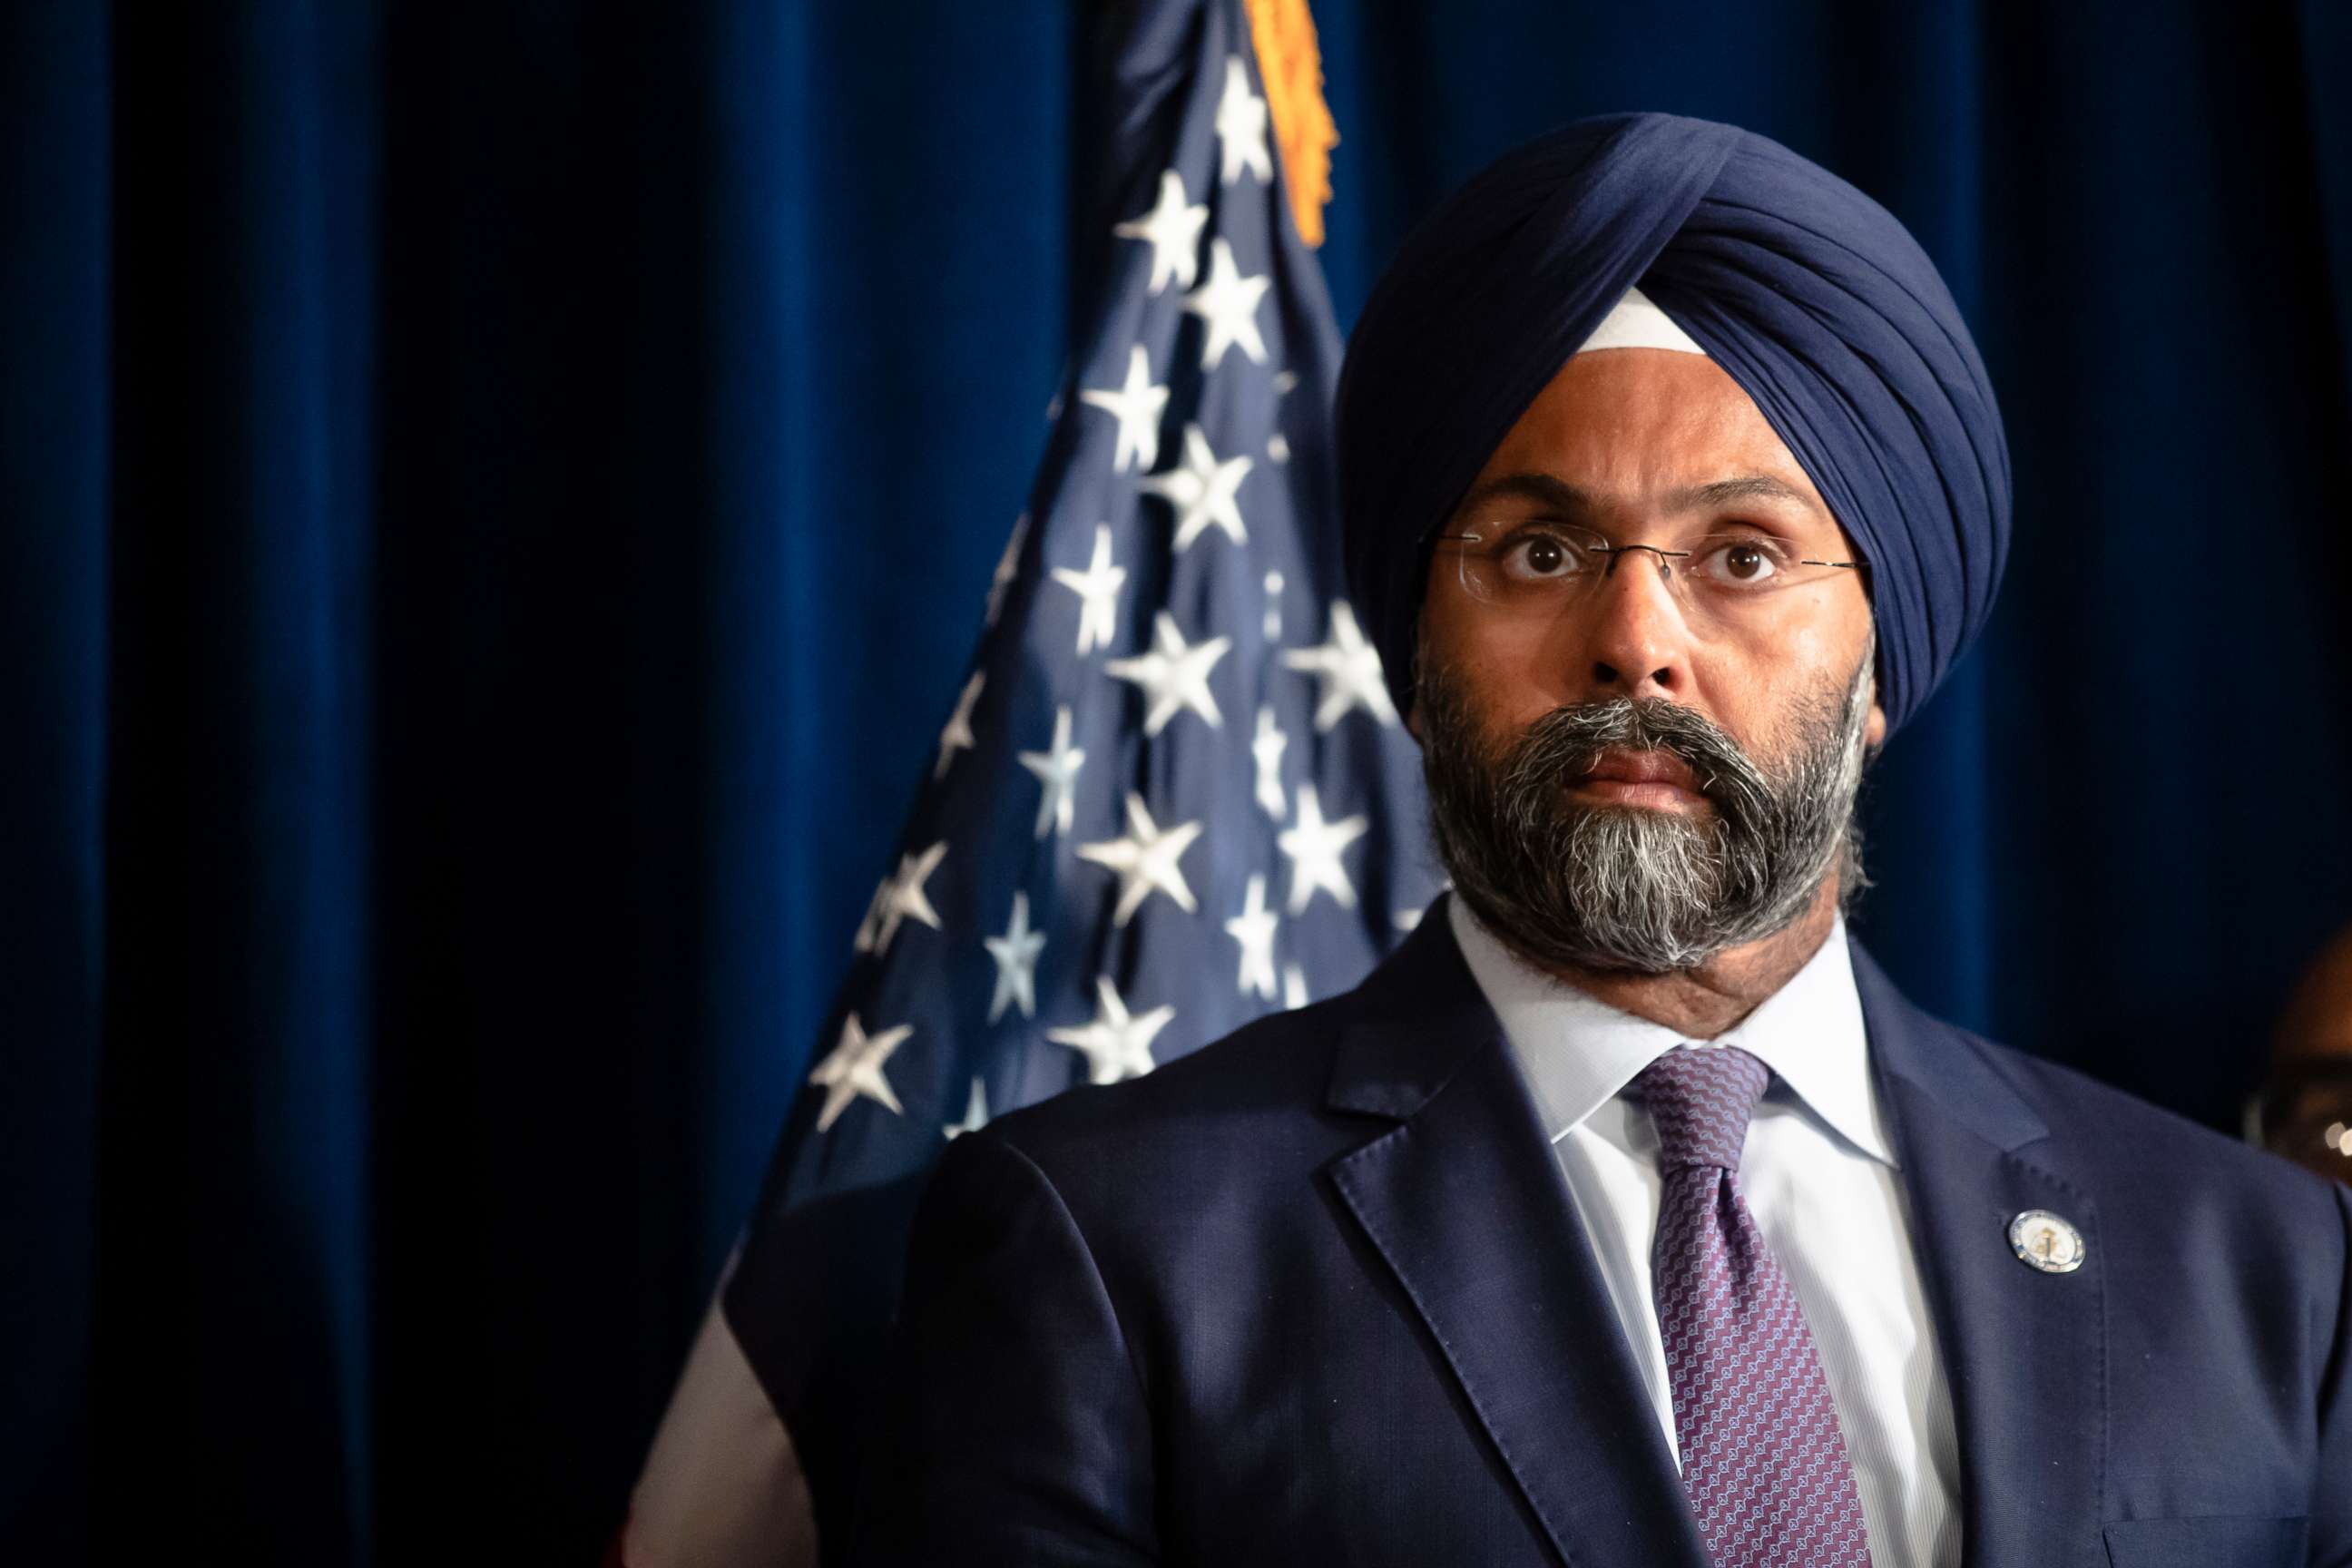 PHOTO: New Jersey Attorney General Gurbir Grewal during a bill signing ceremony at the state capital in Trenton, N.J., Aug. 5, 2019.